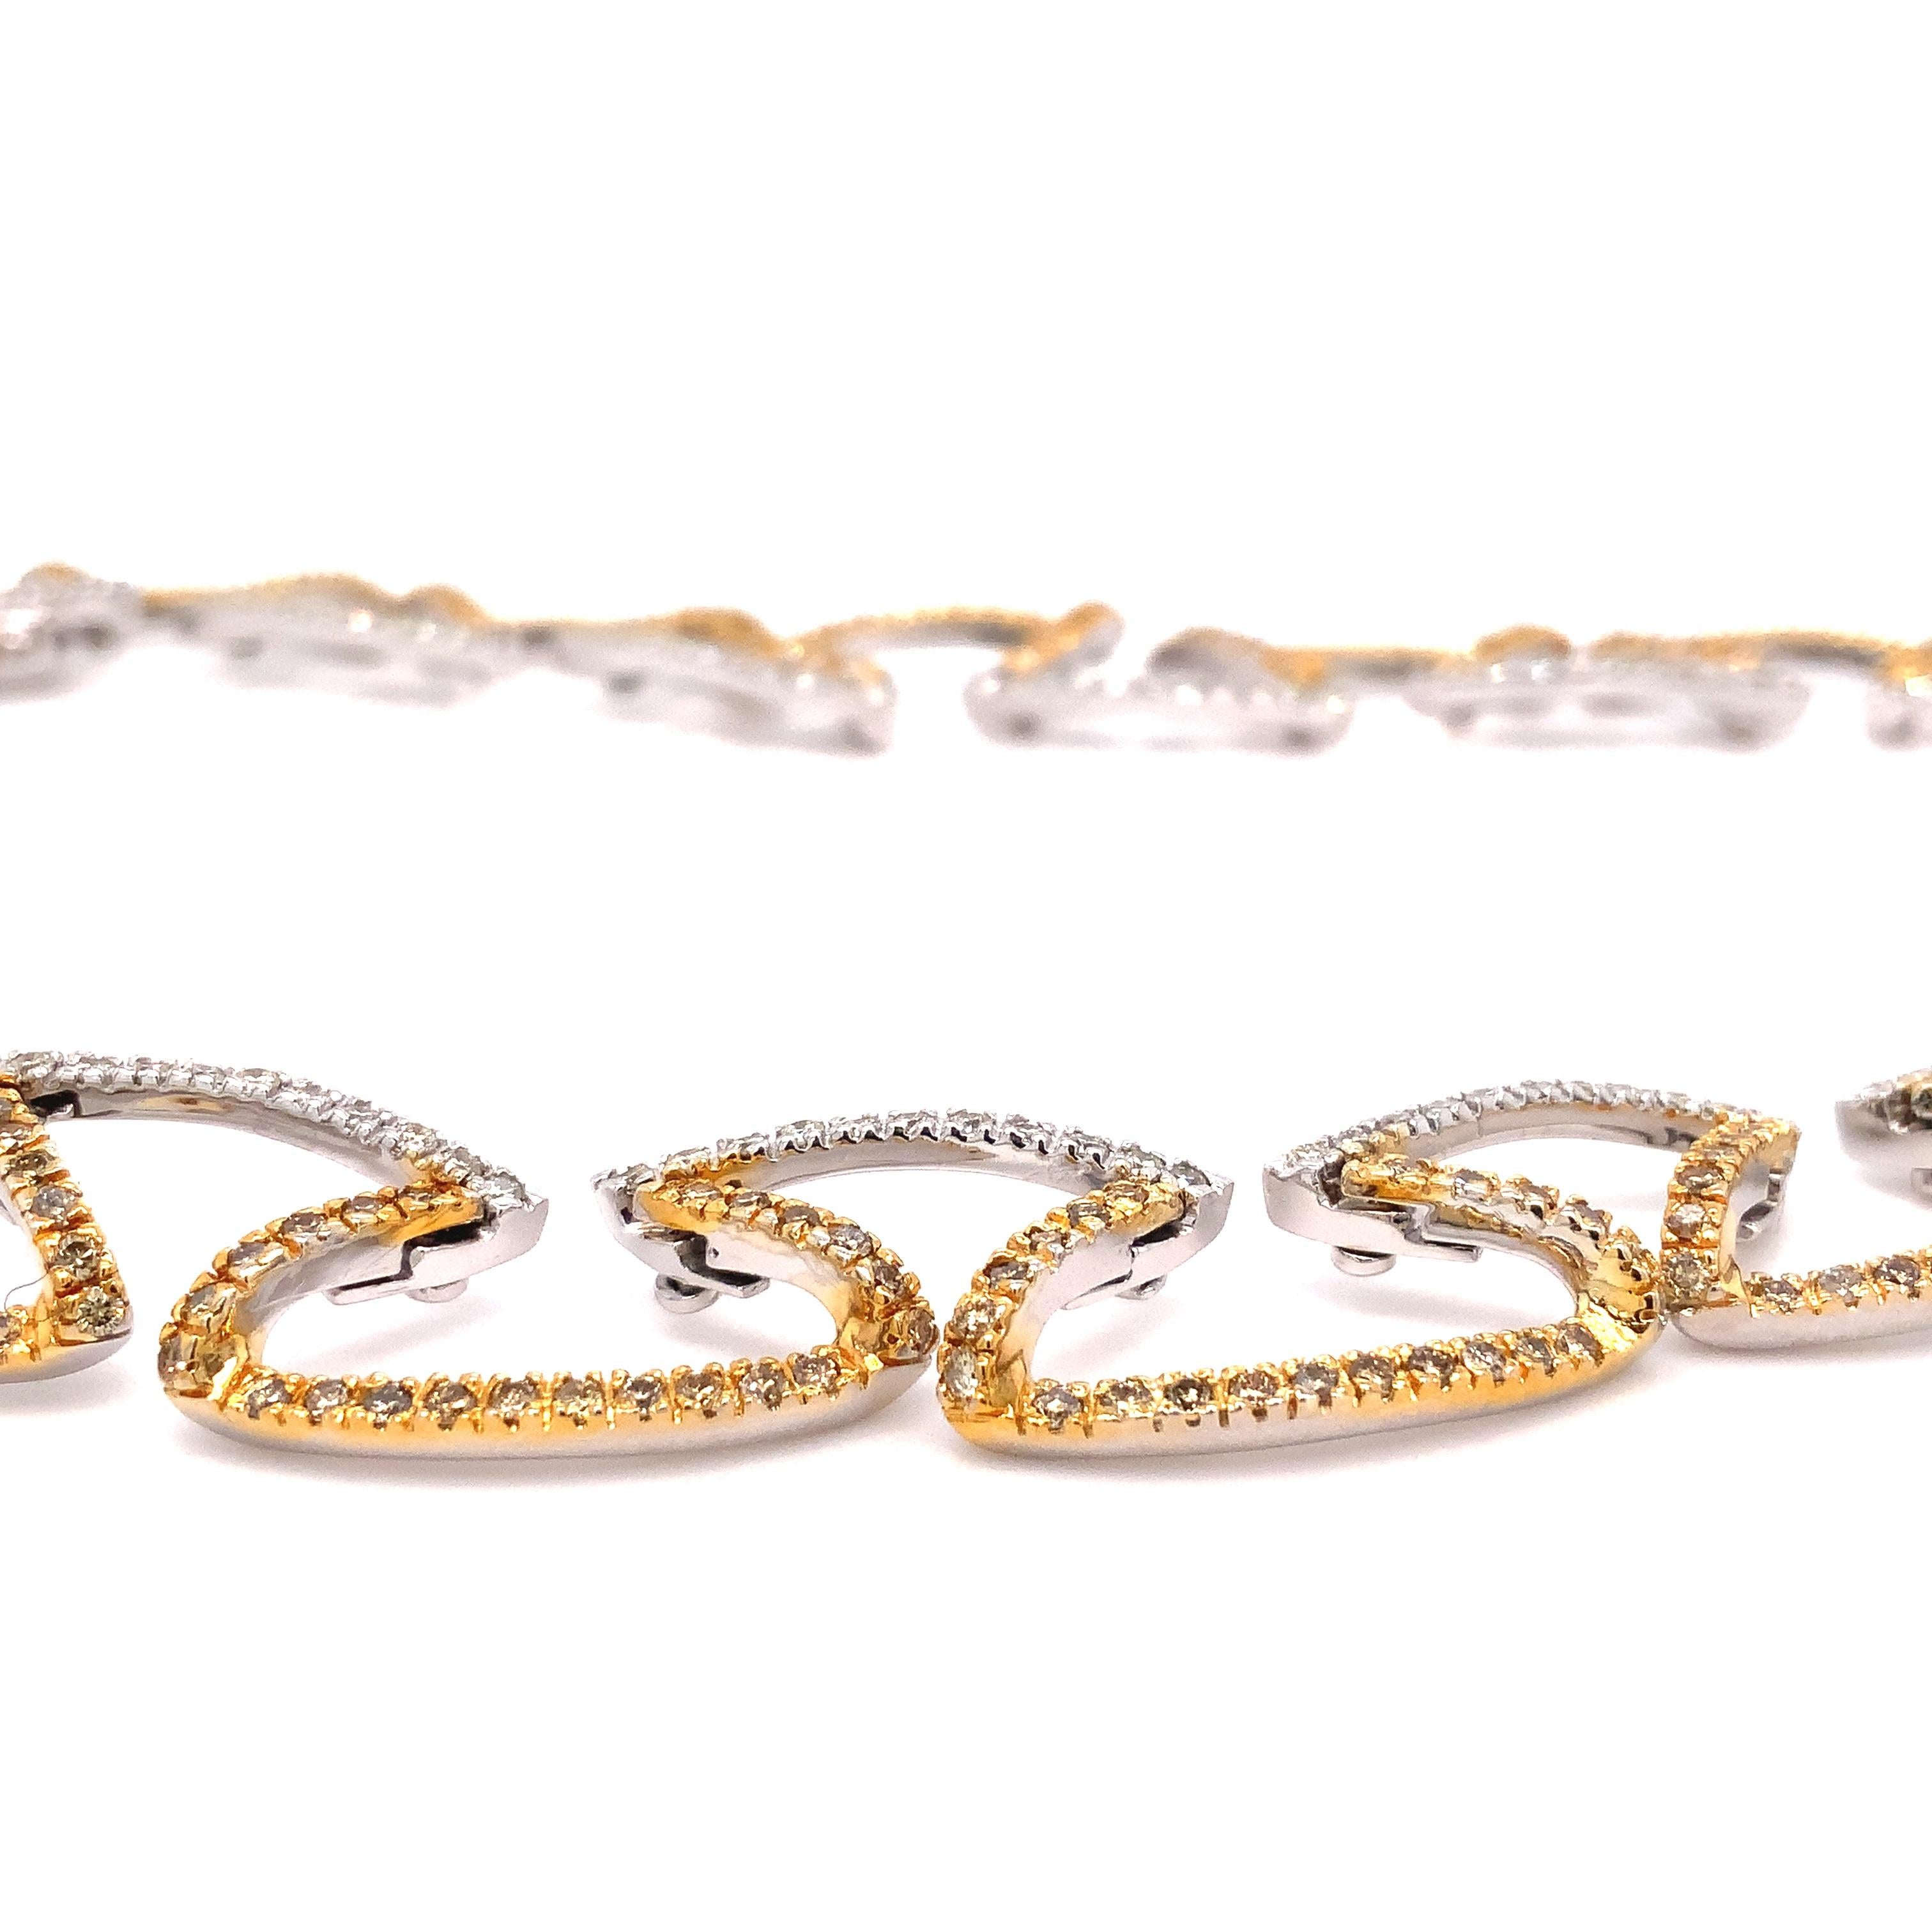 White and Fancy Yellow Diamond Choker Necklace Set in 18 Karat White Gold In Excellent Condition For Sale In Los Gatos, CA